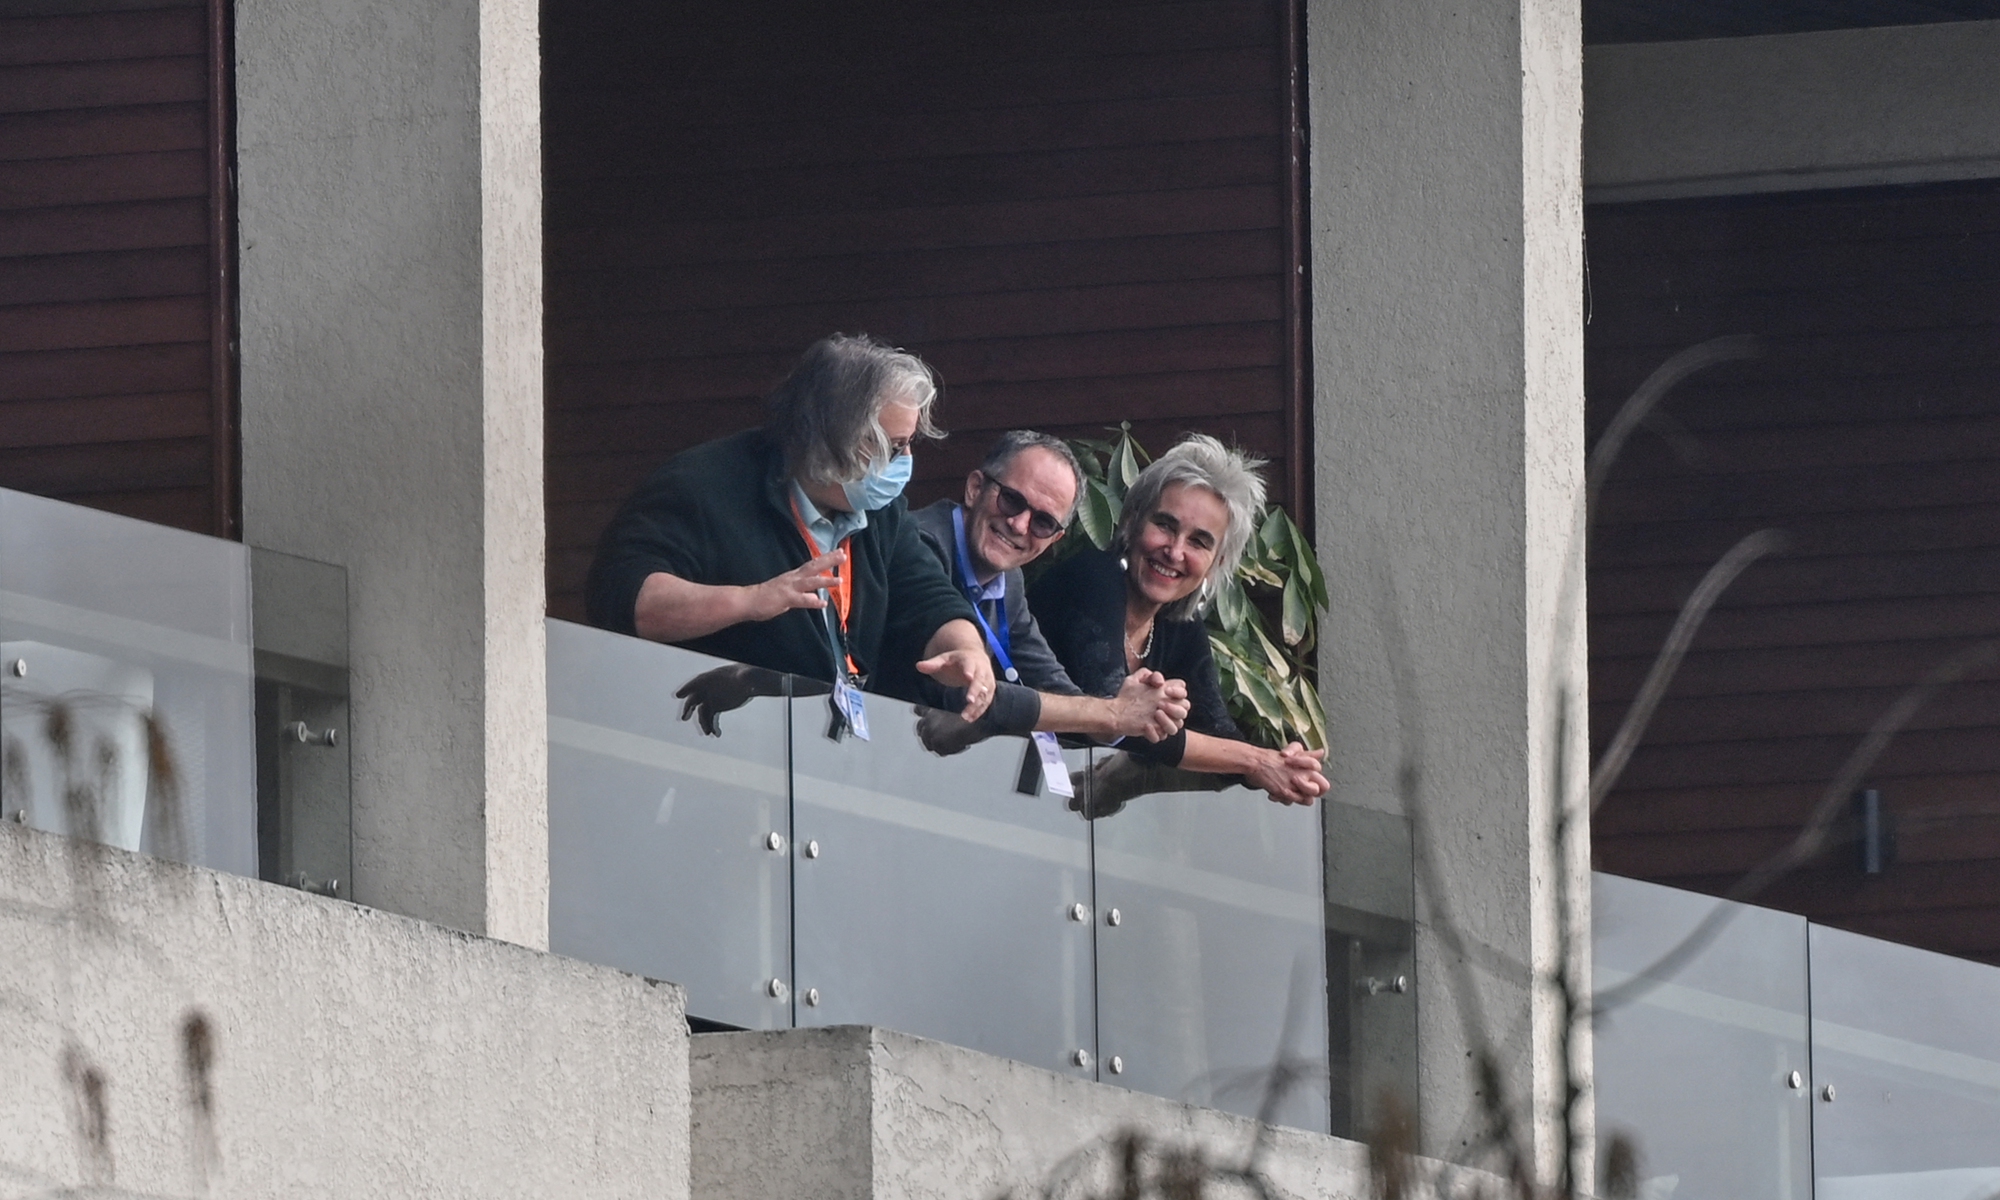 Peter Ben Embarek (center), Marion Koopmans (right) and other members of the World Health Organization (WHO) team investigating the origins of the coronavirus, are seen on a balcony at the Wuhan Hilton Optics Valley Hotel in Wuhan, Central China's Hubei Province on Monday. Photo: AFP